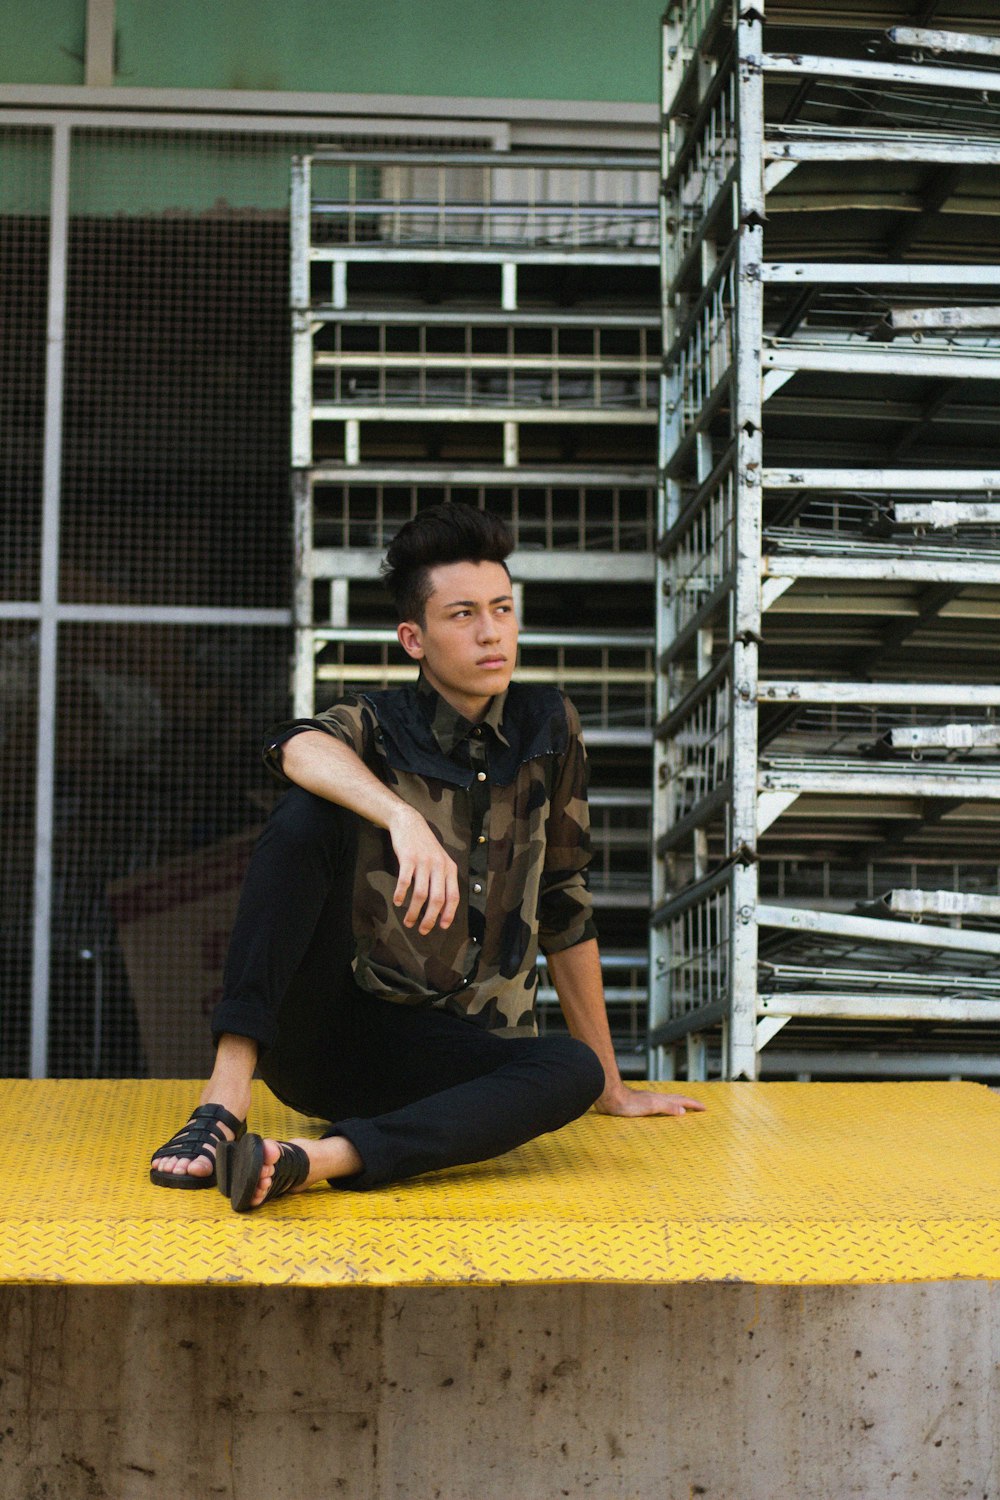 man sitting on yellow surface looking up